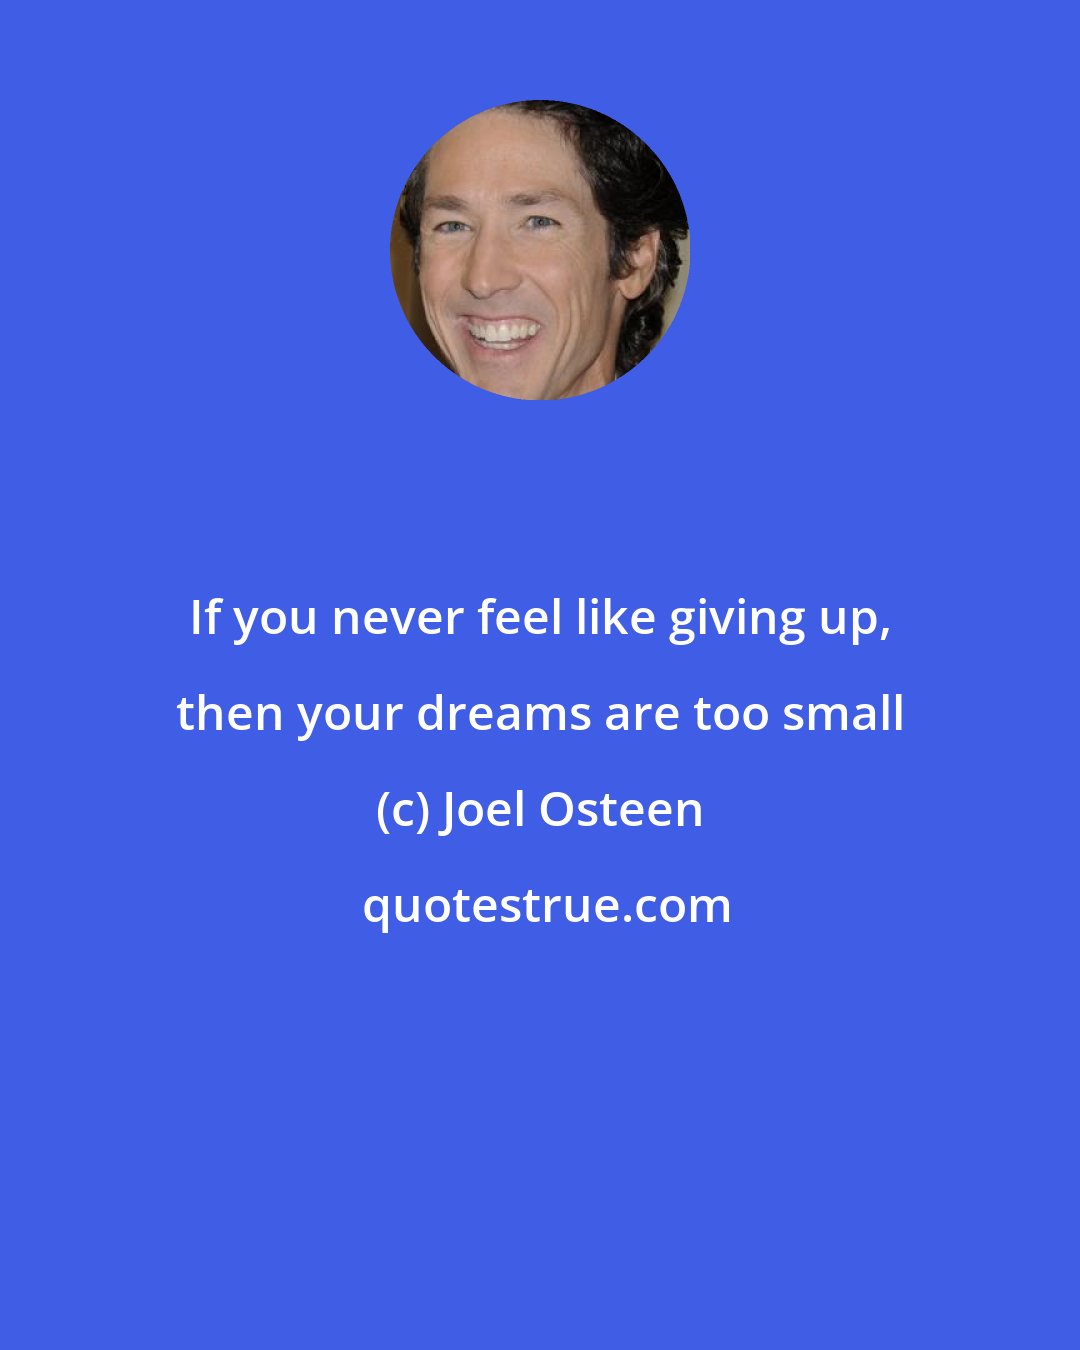 Joel Osteen: If you never feel like giving up, then your dreams are too small